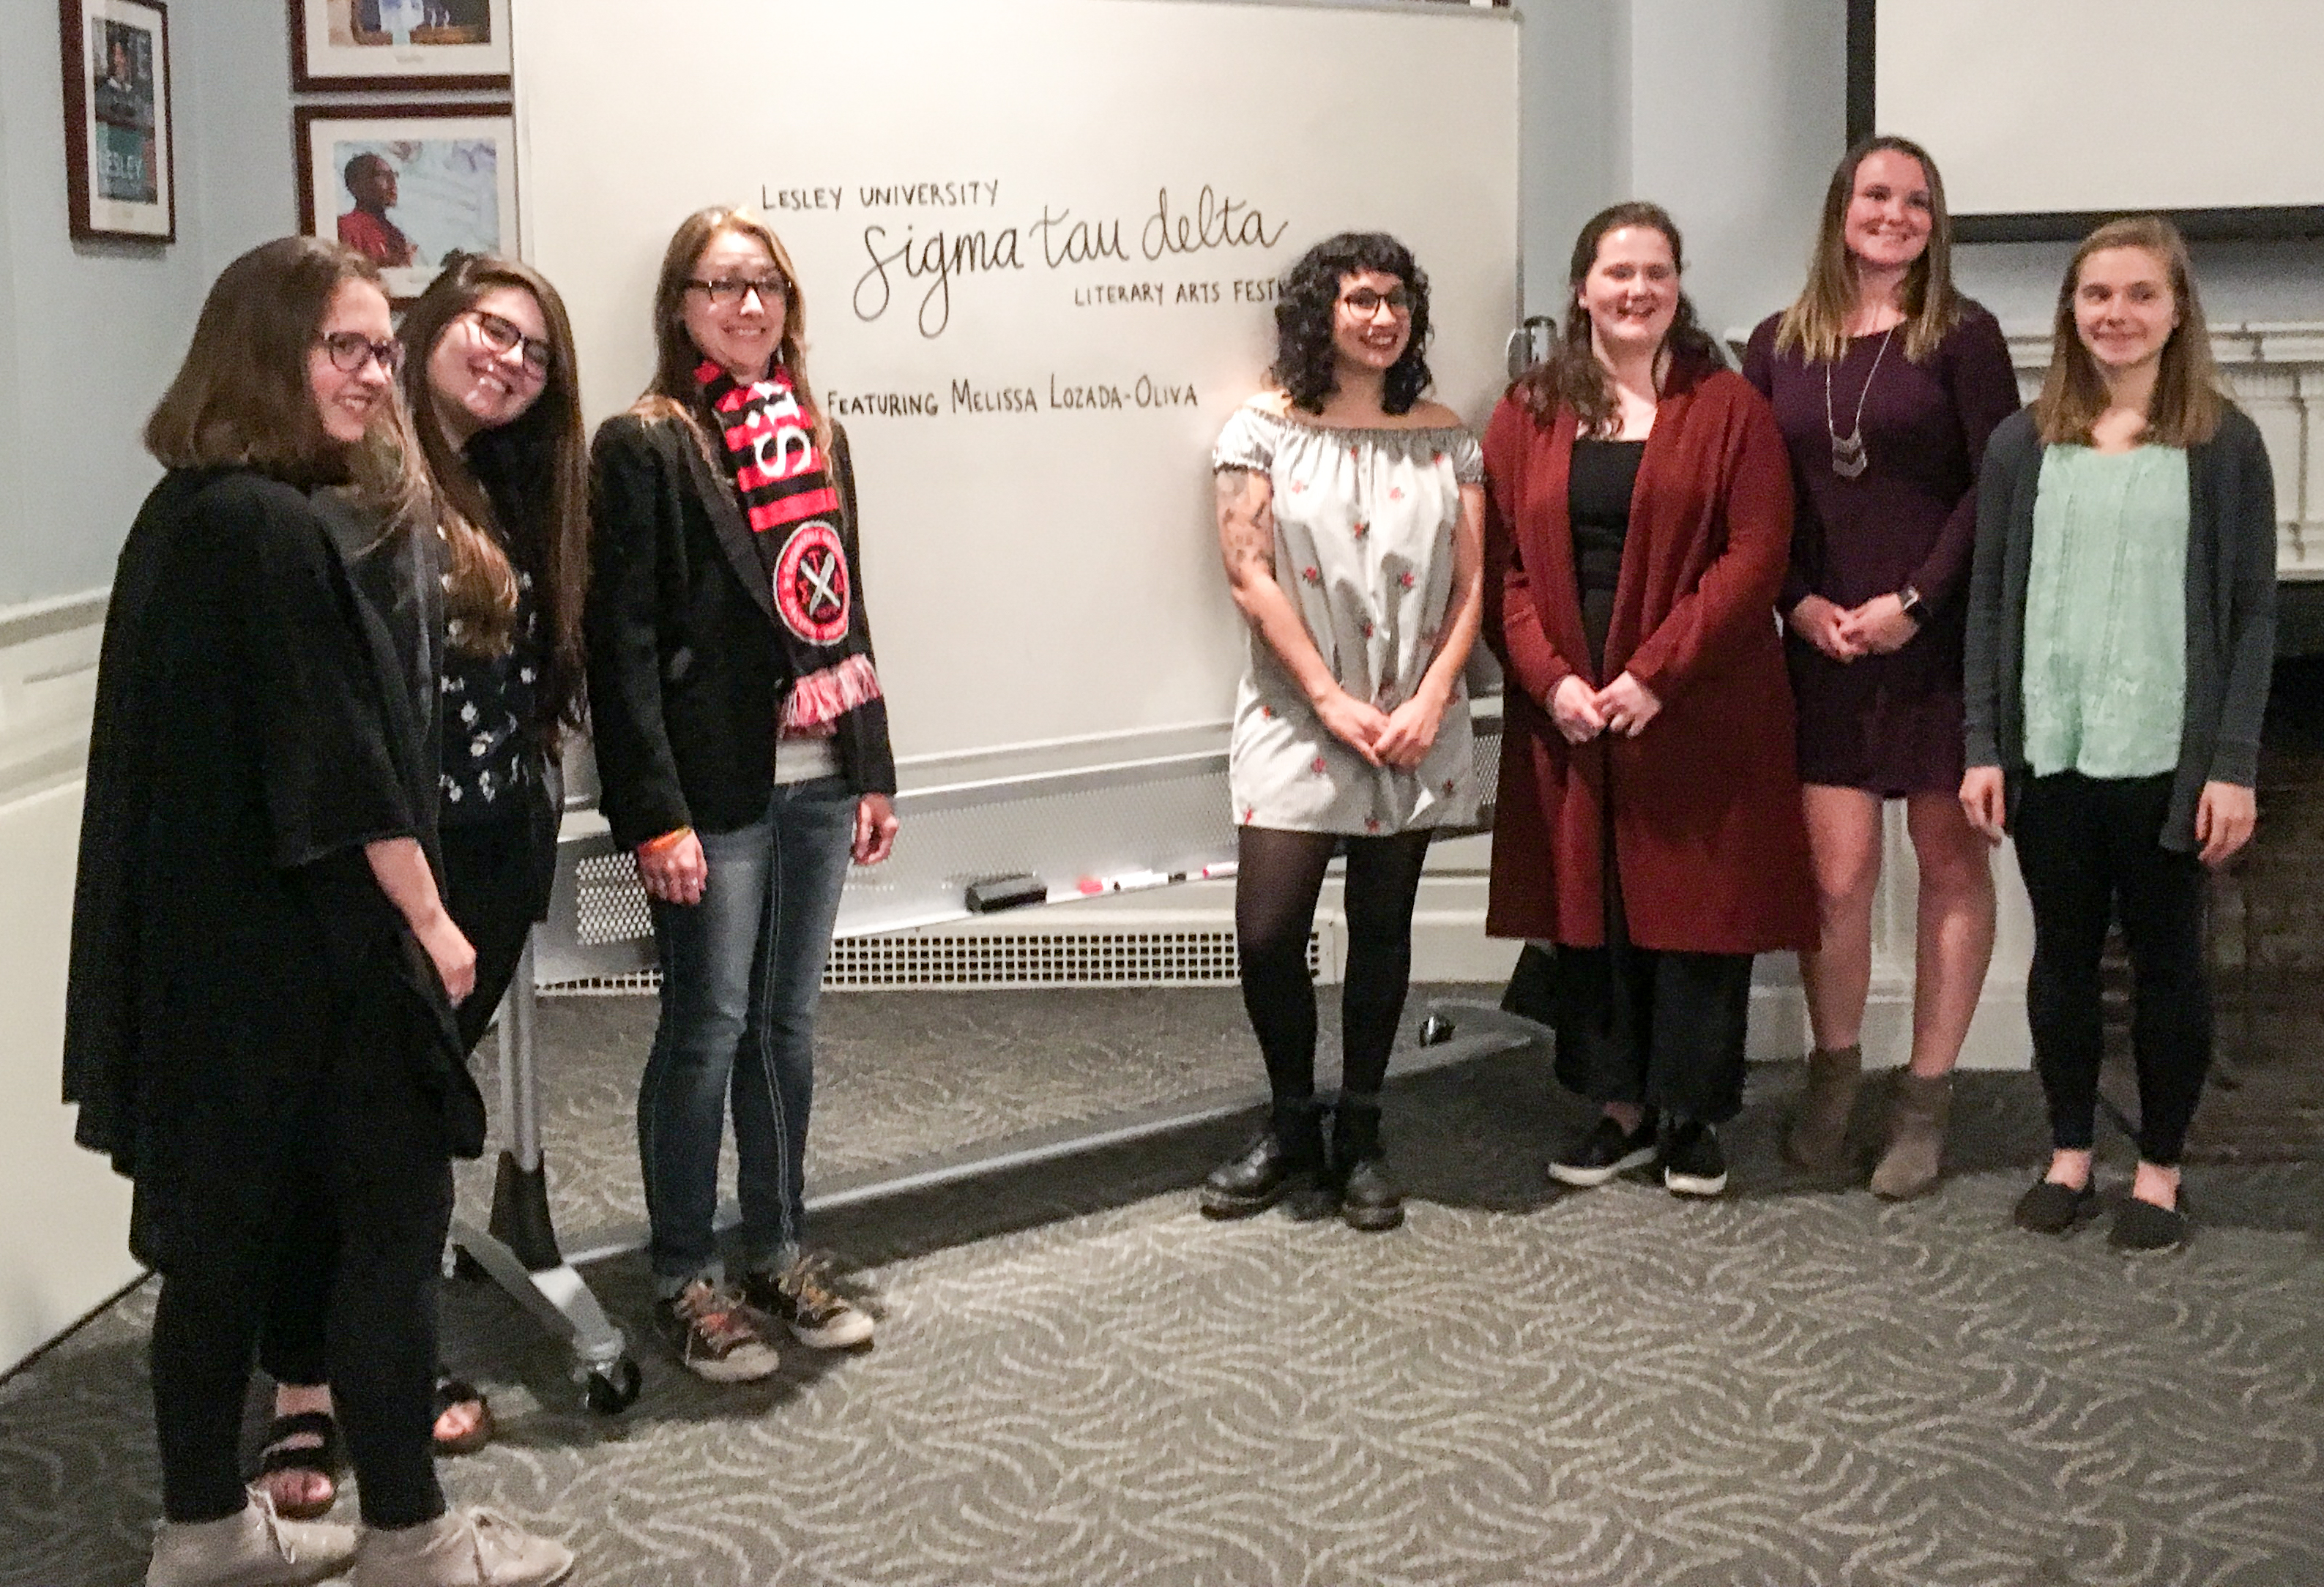 Members of our Sigma Tau Delta English honors society take a photo with Literary Arts Festival special guest, poet Melissa Lozada-Oliva. From left, Maya Grubner, Cheyenne MacDonald (chapter president), Gwendolyn Squires, Melissa Lozada-Oliva, Lizzie Davis, Megan Breslow and Olivia MacDonald.